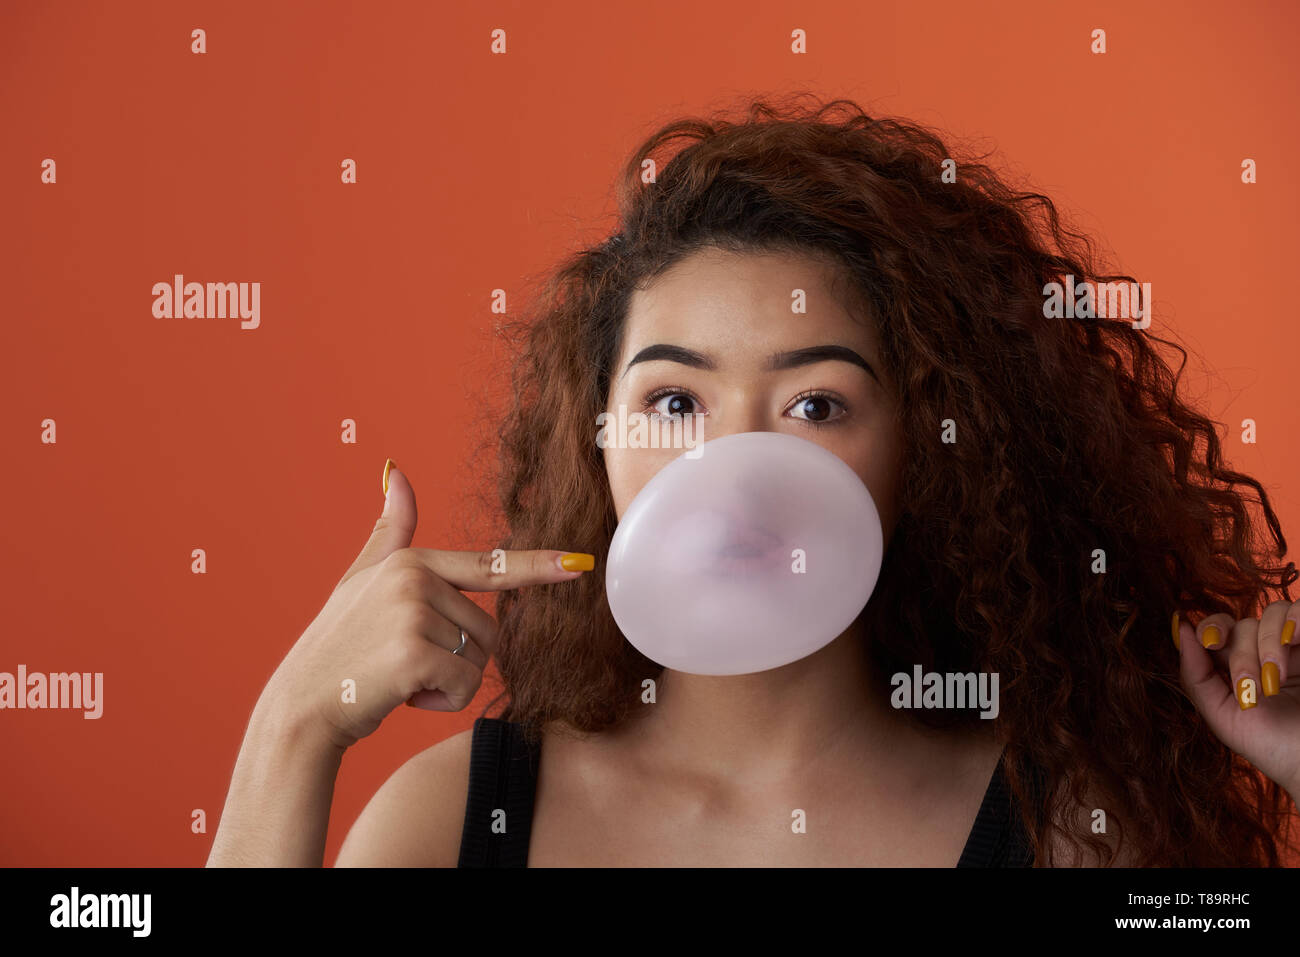 Funny portrait of girl with bubble gum ball in studio Stock Photo